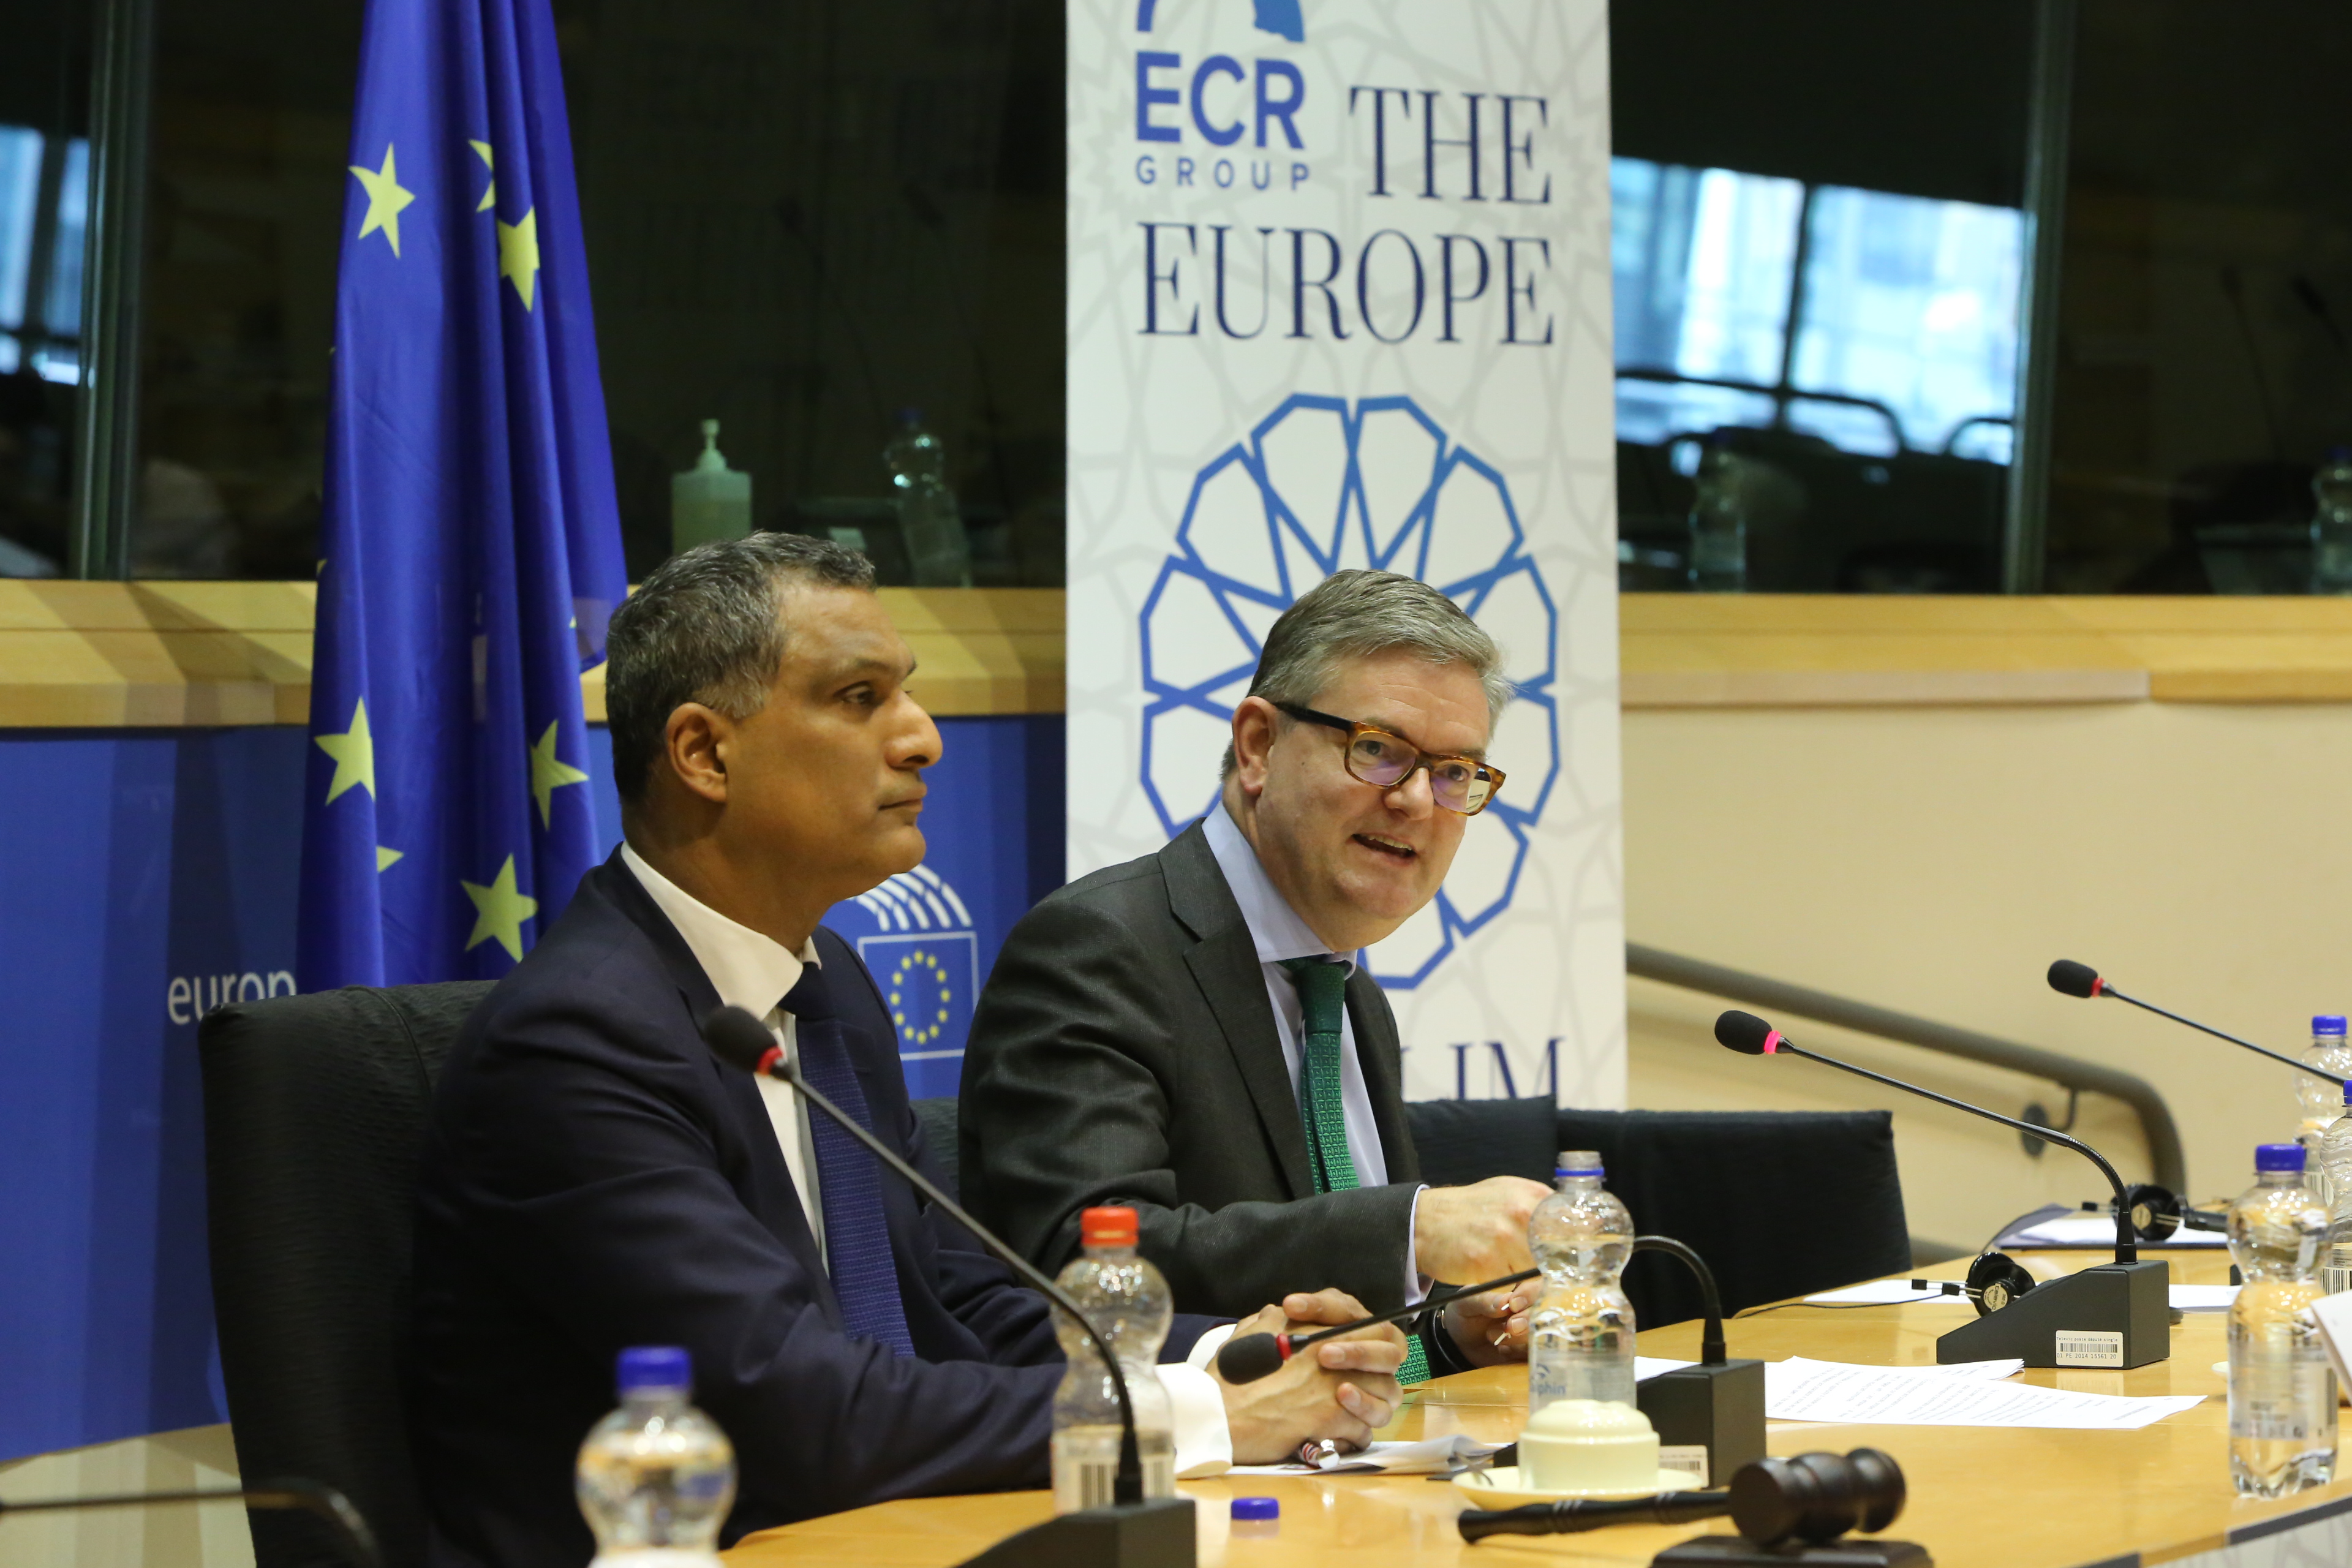 EU Commissioner for Security Union Sir Julian King (right) and British MEP Syed Kamal addressing the conference.